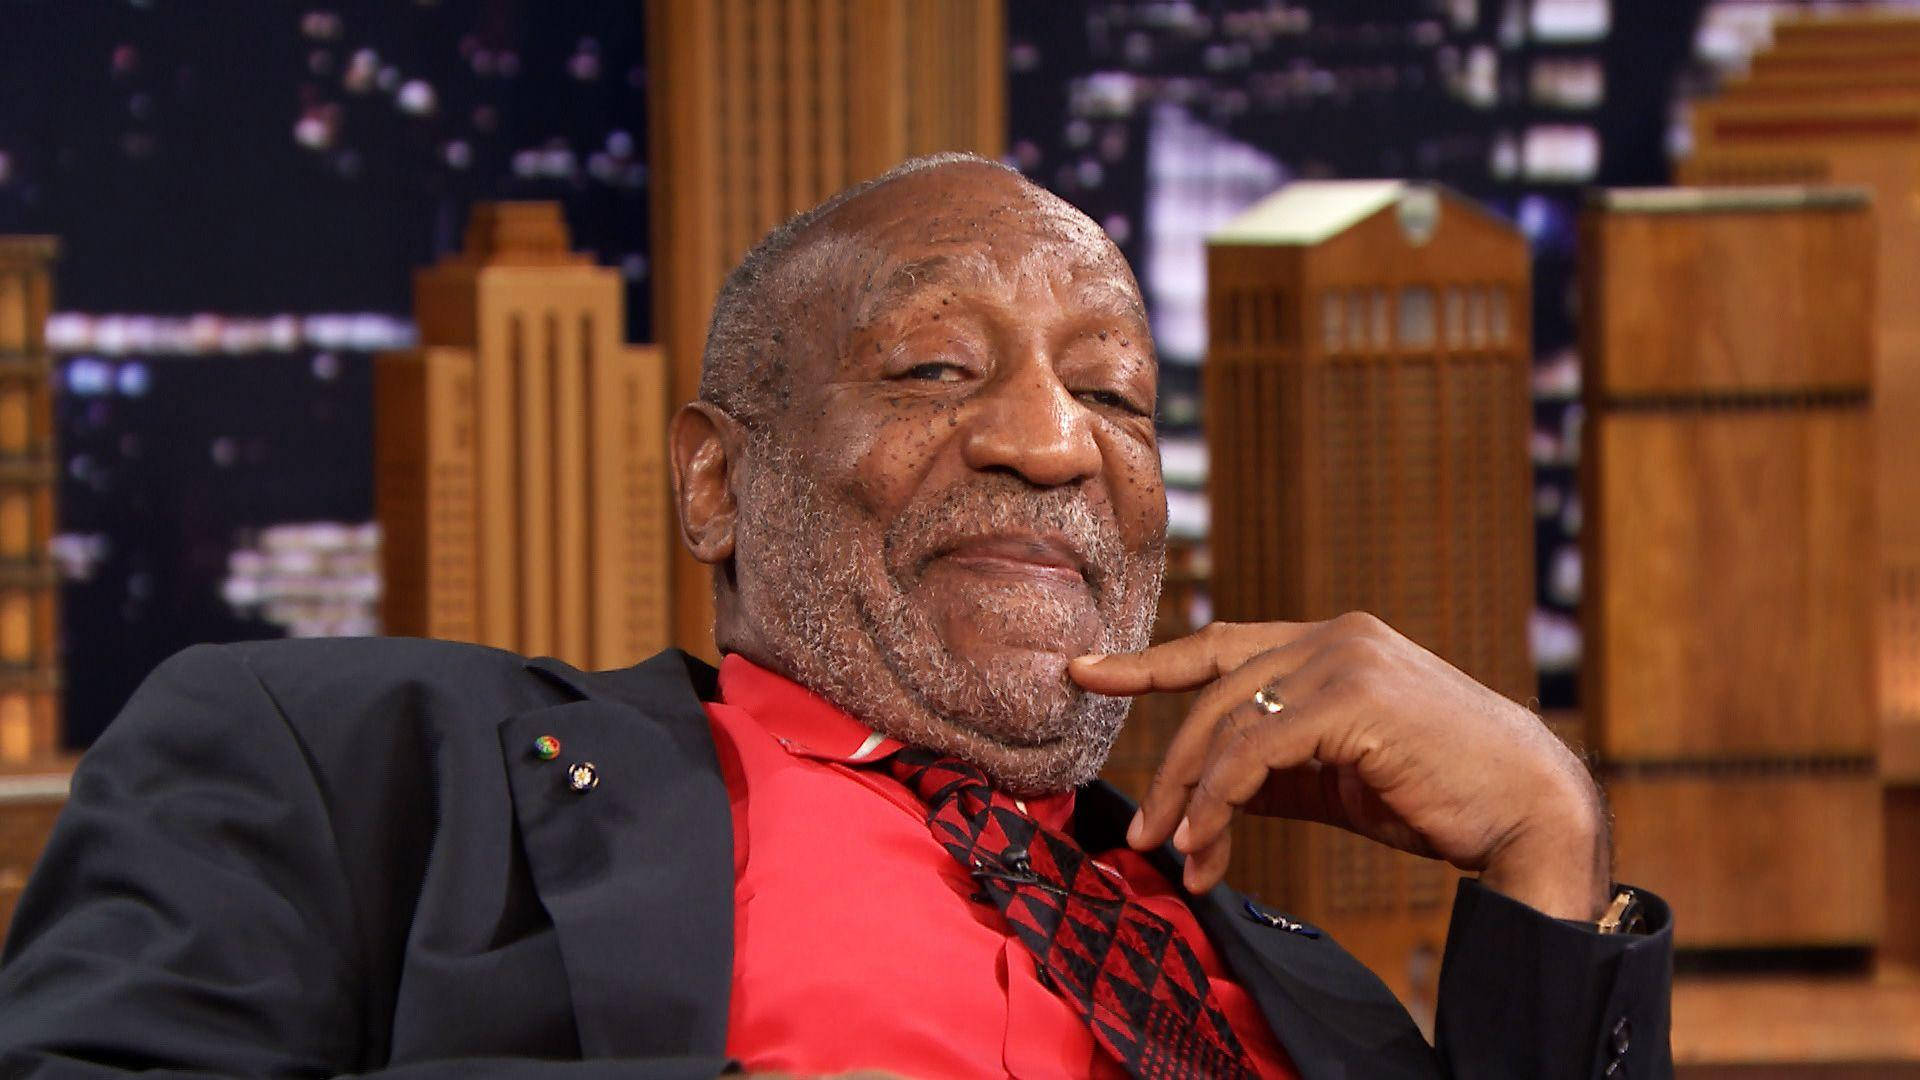 Regning Cosby 1920 X 1080 Wallpaper